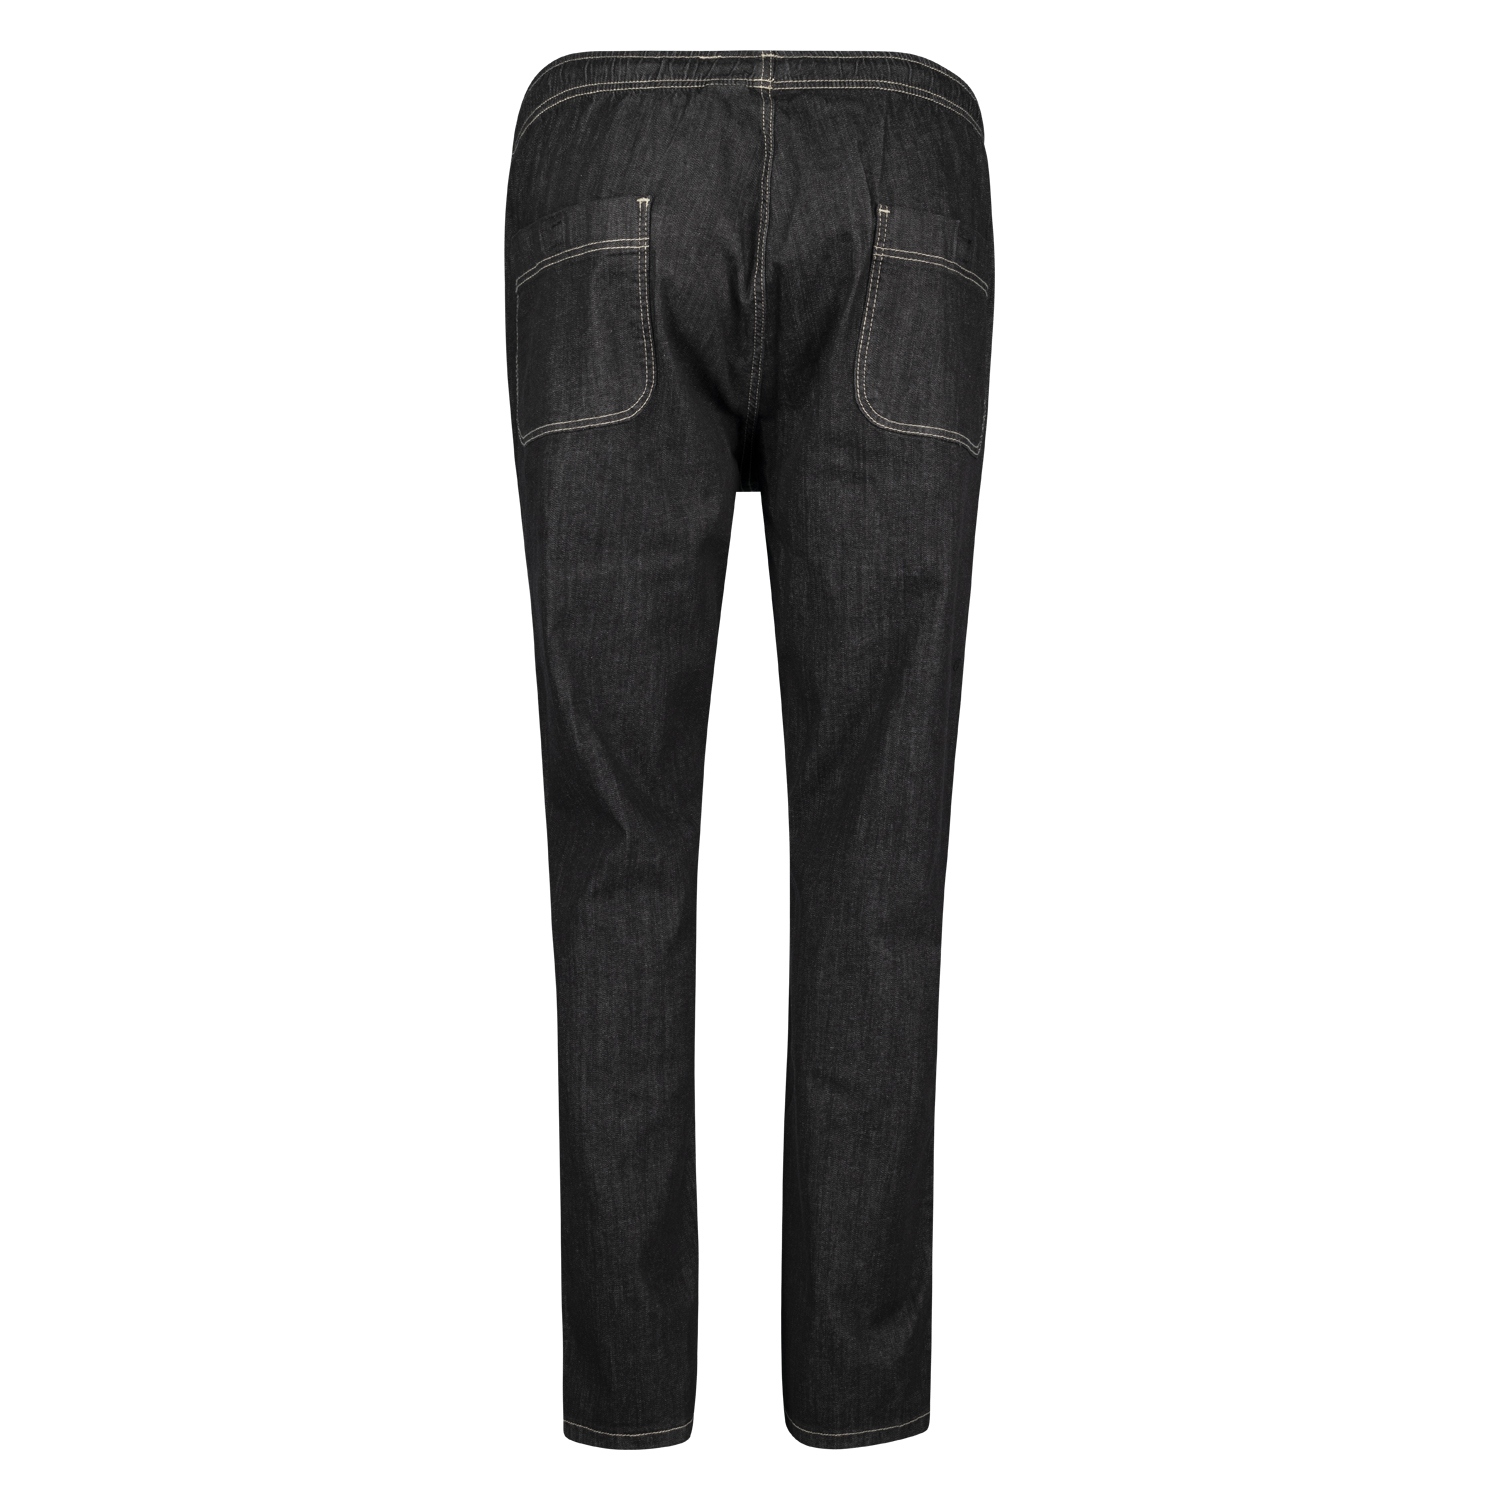 Jogging jeans in black by Abraxas in oversizes up to 12XL